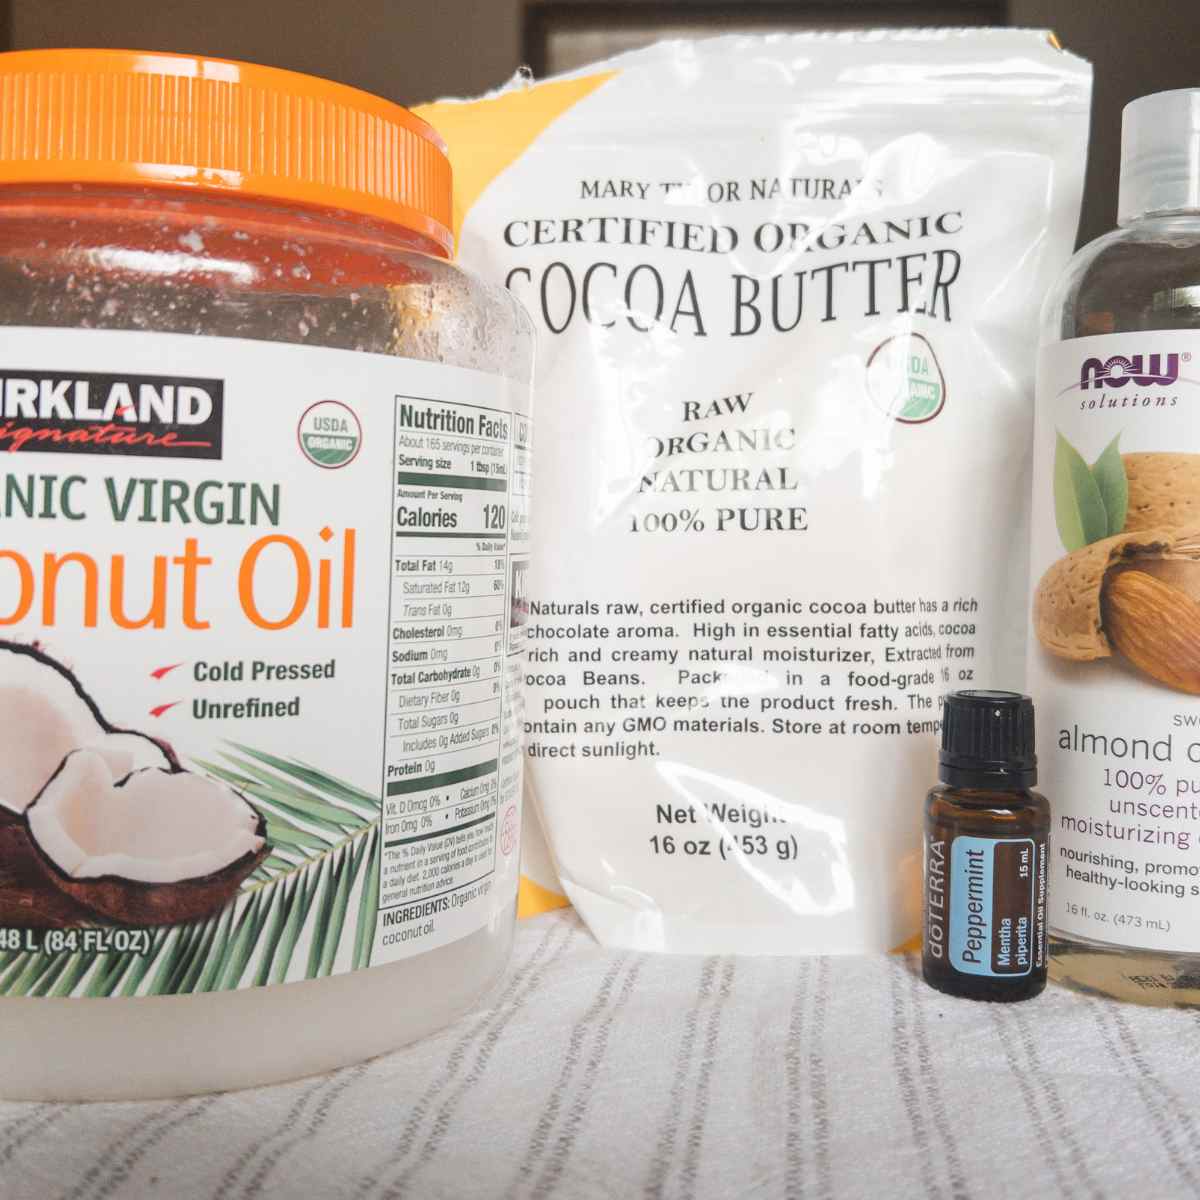 cocoa butter lotion recipe ingredients. coconut oil, cocoa butter, sweet almond oil, essential oil.